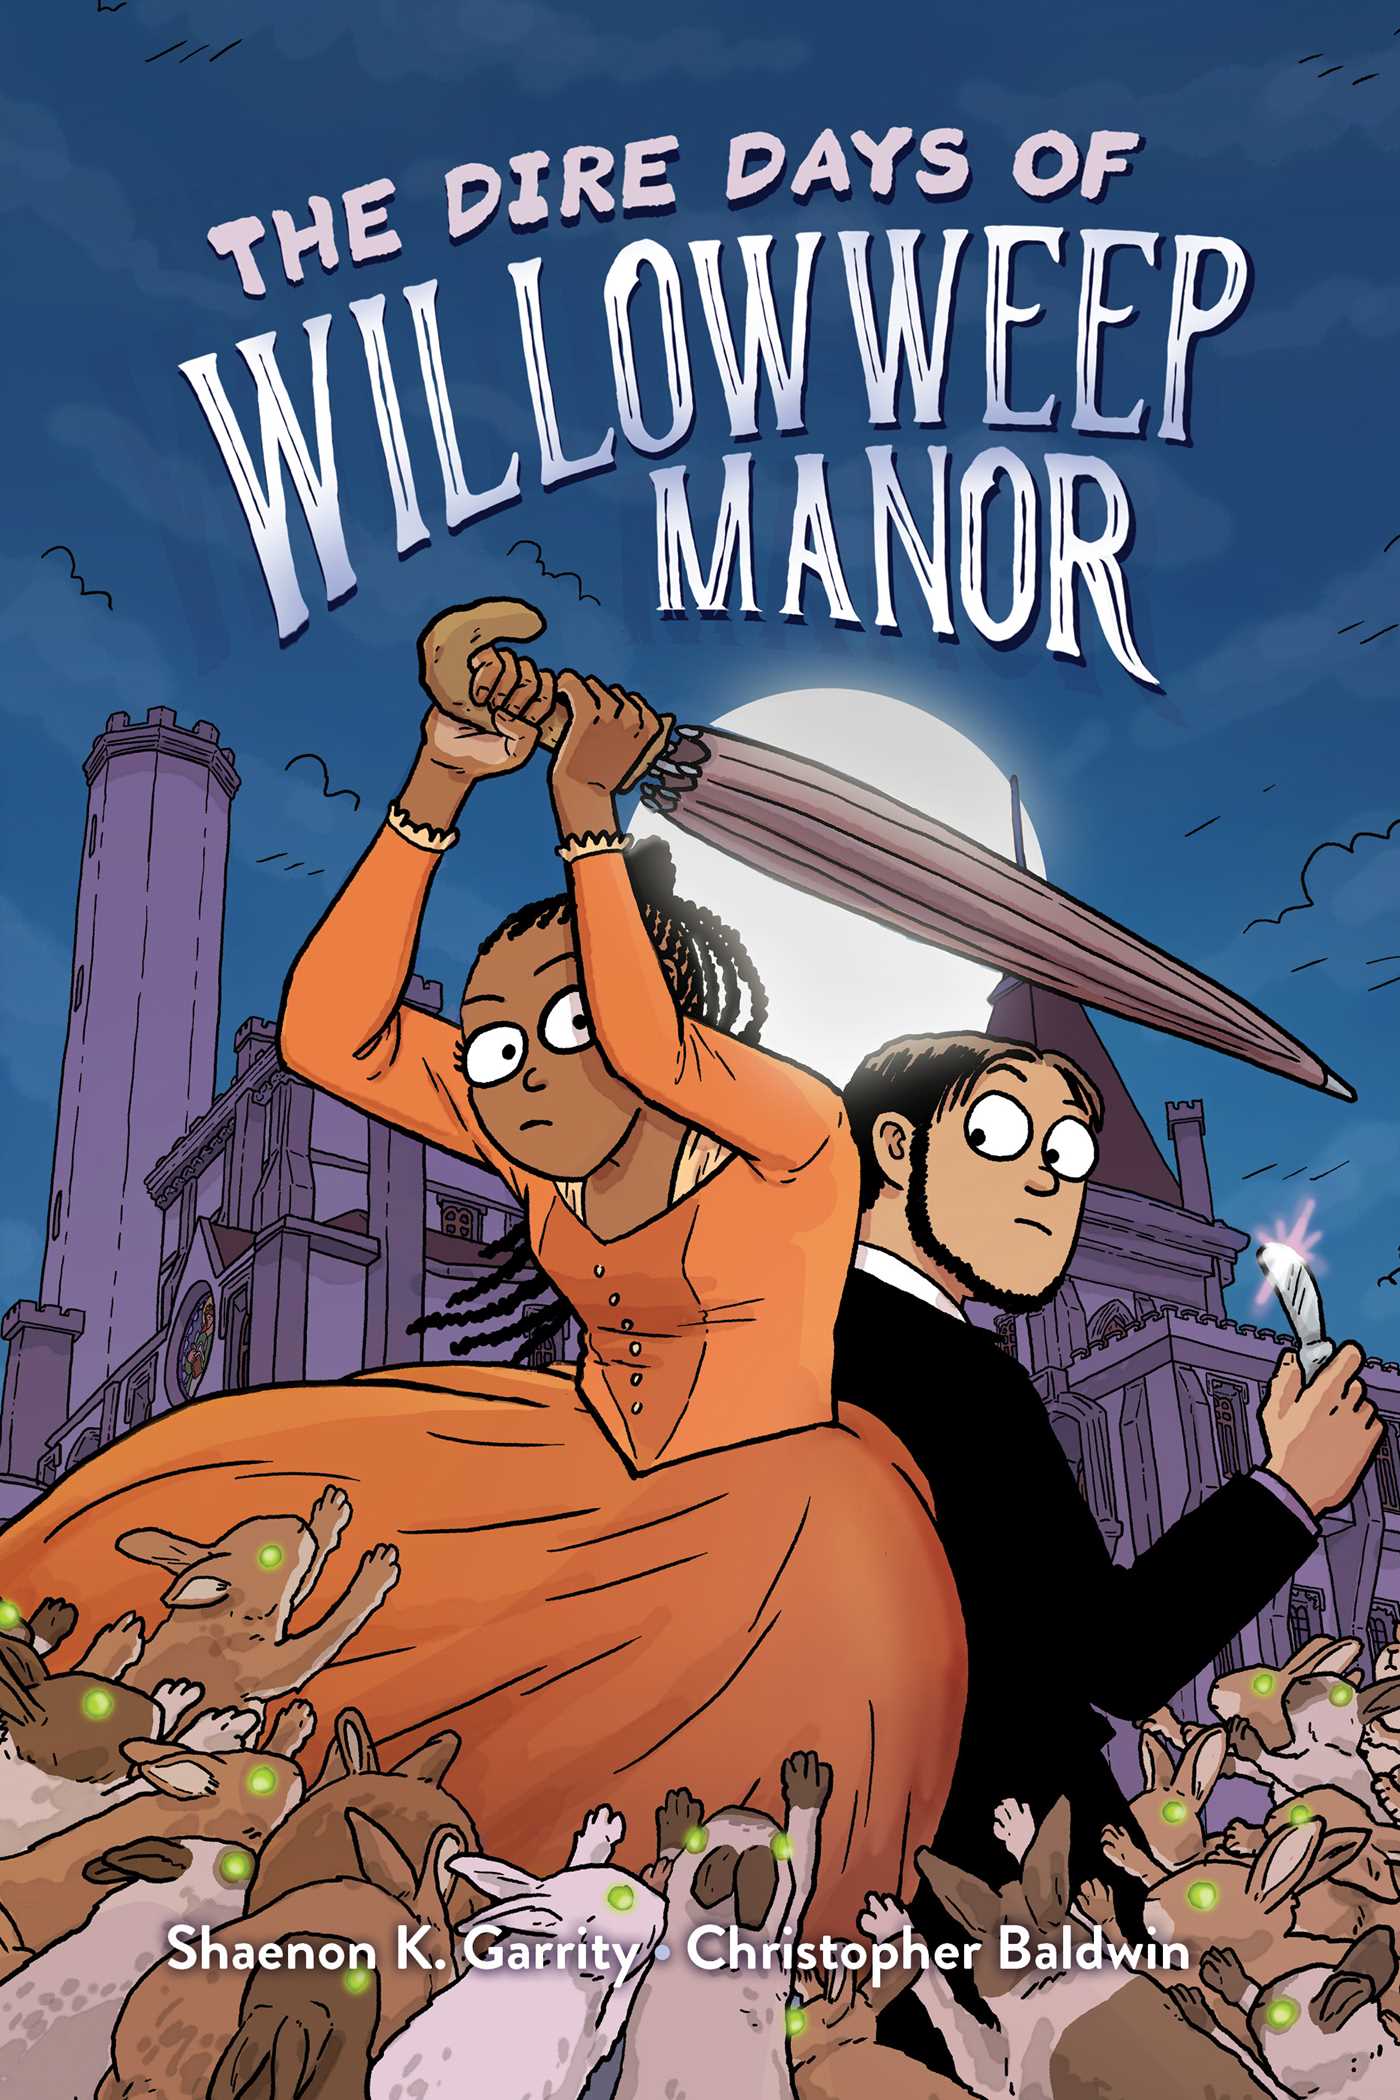 The Dire Days of Willowweep Manor cover